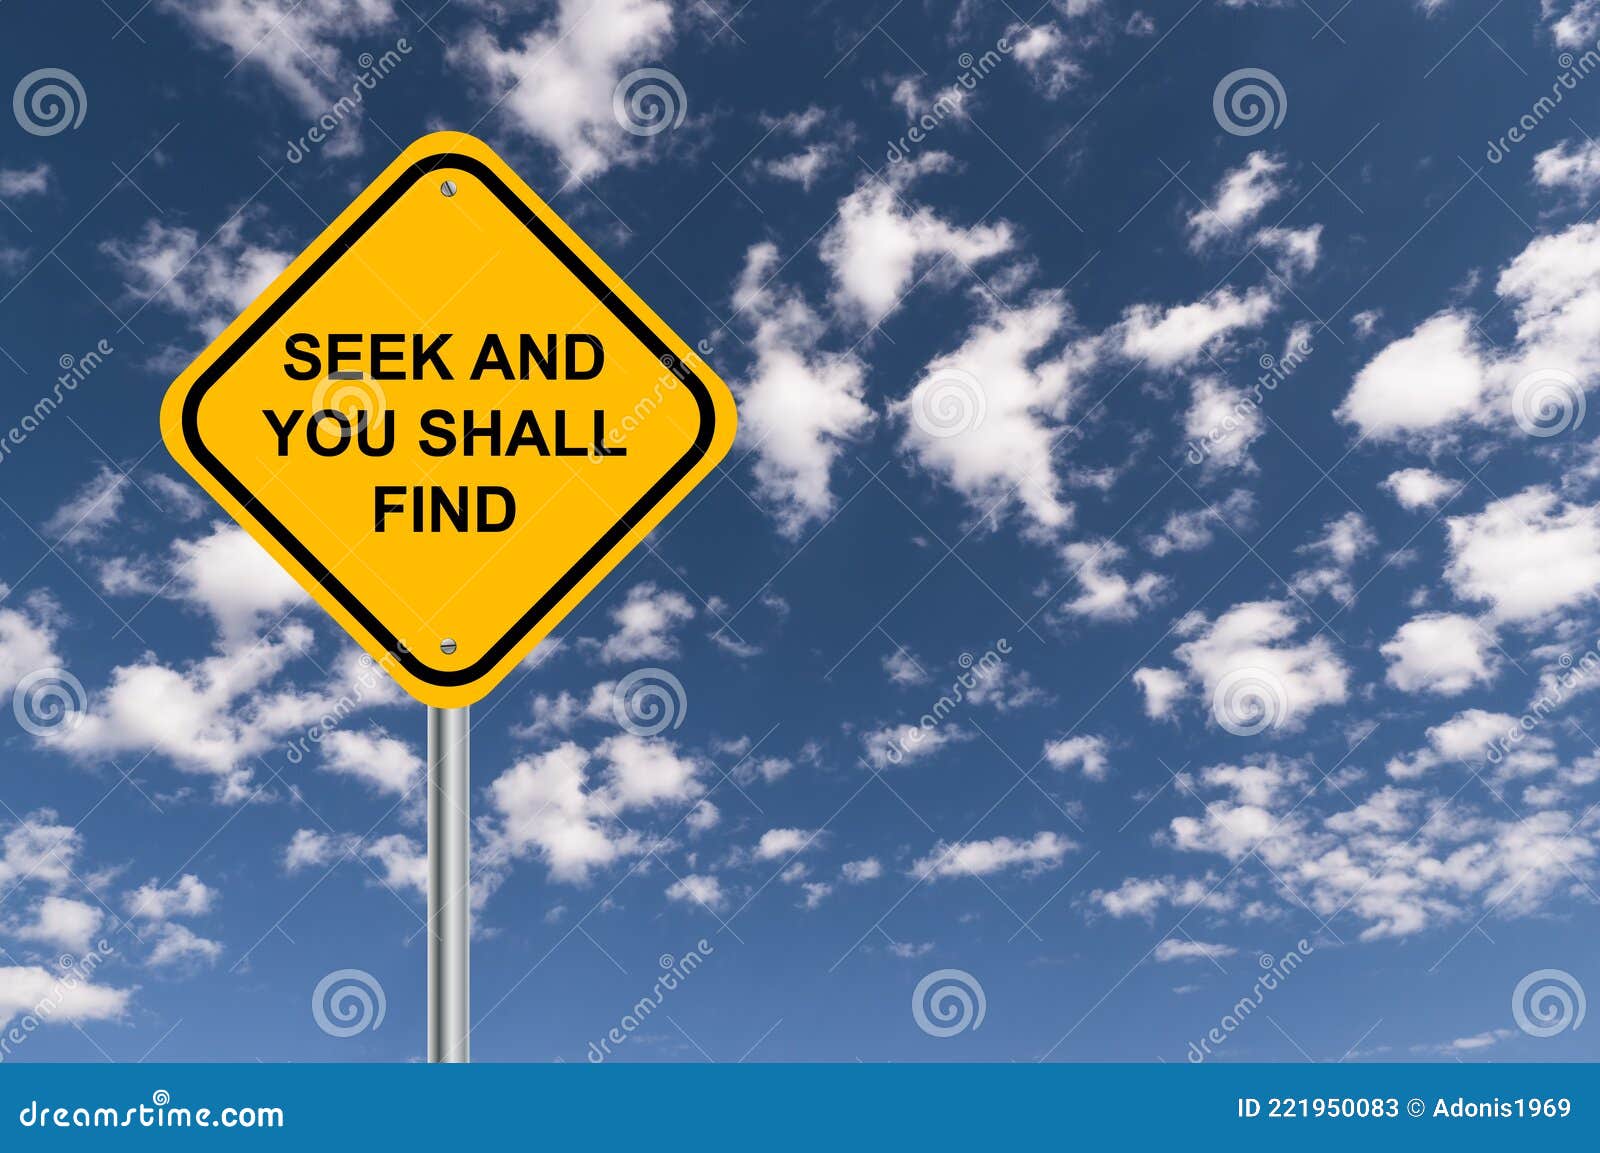 seek and you shall find traffic sign